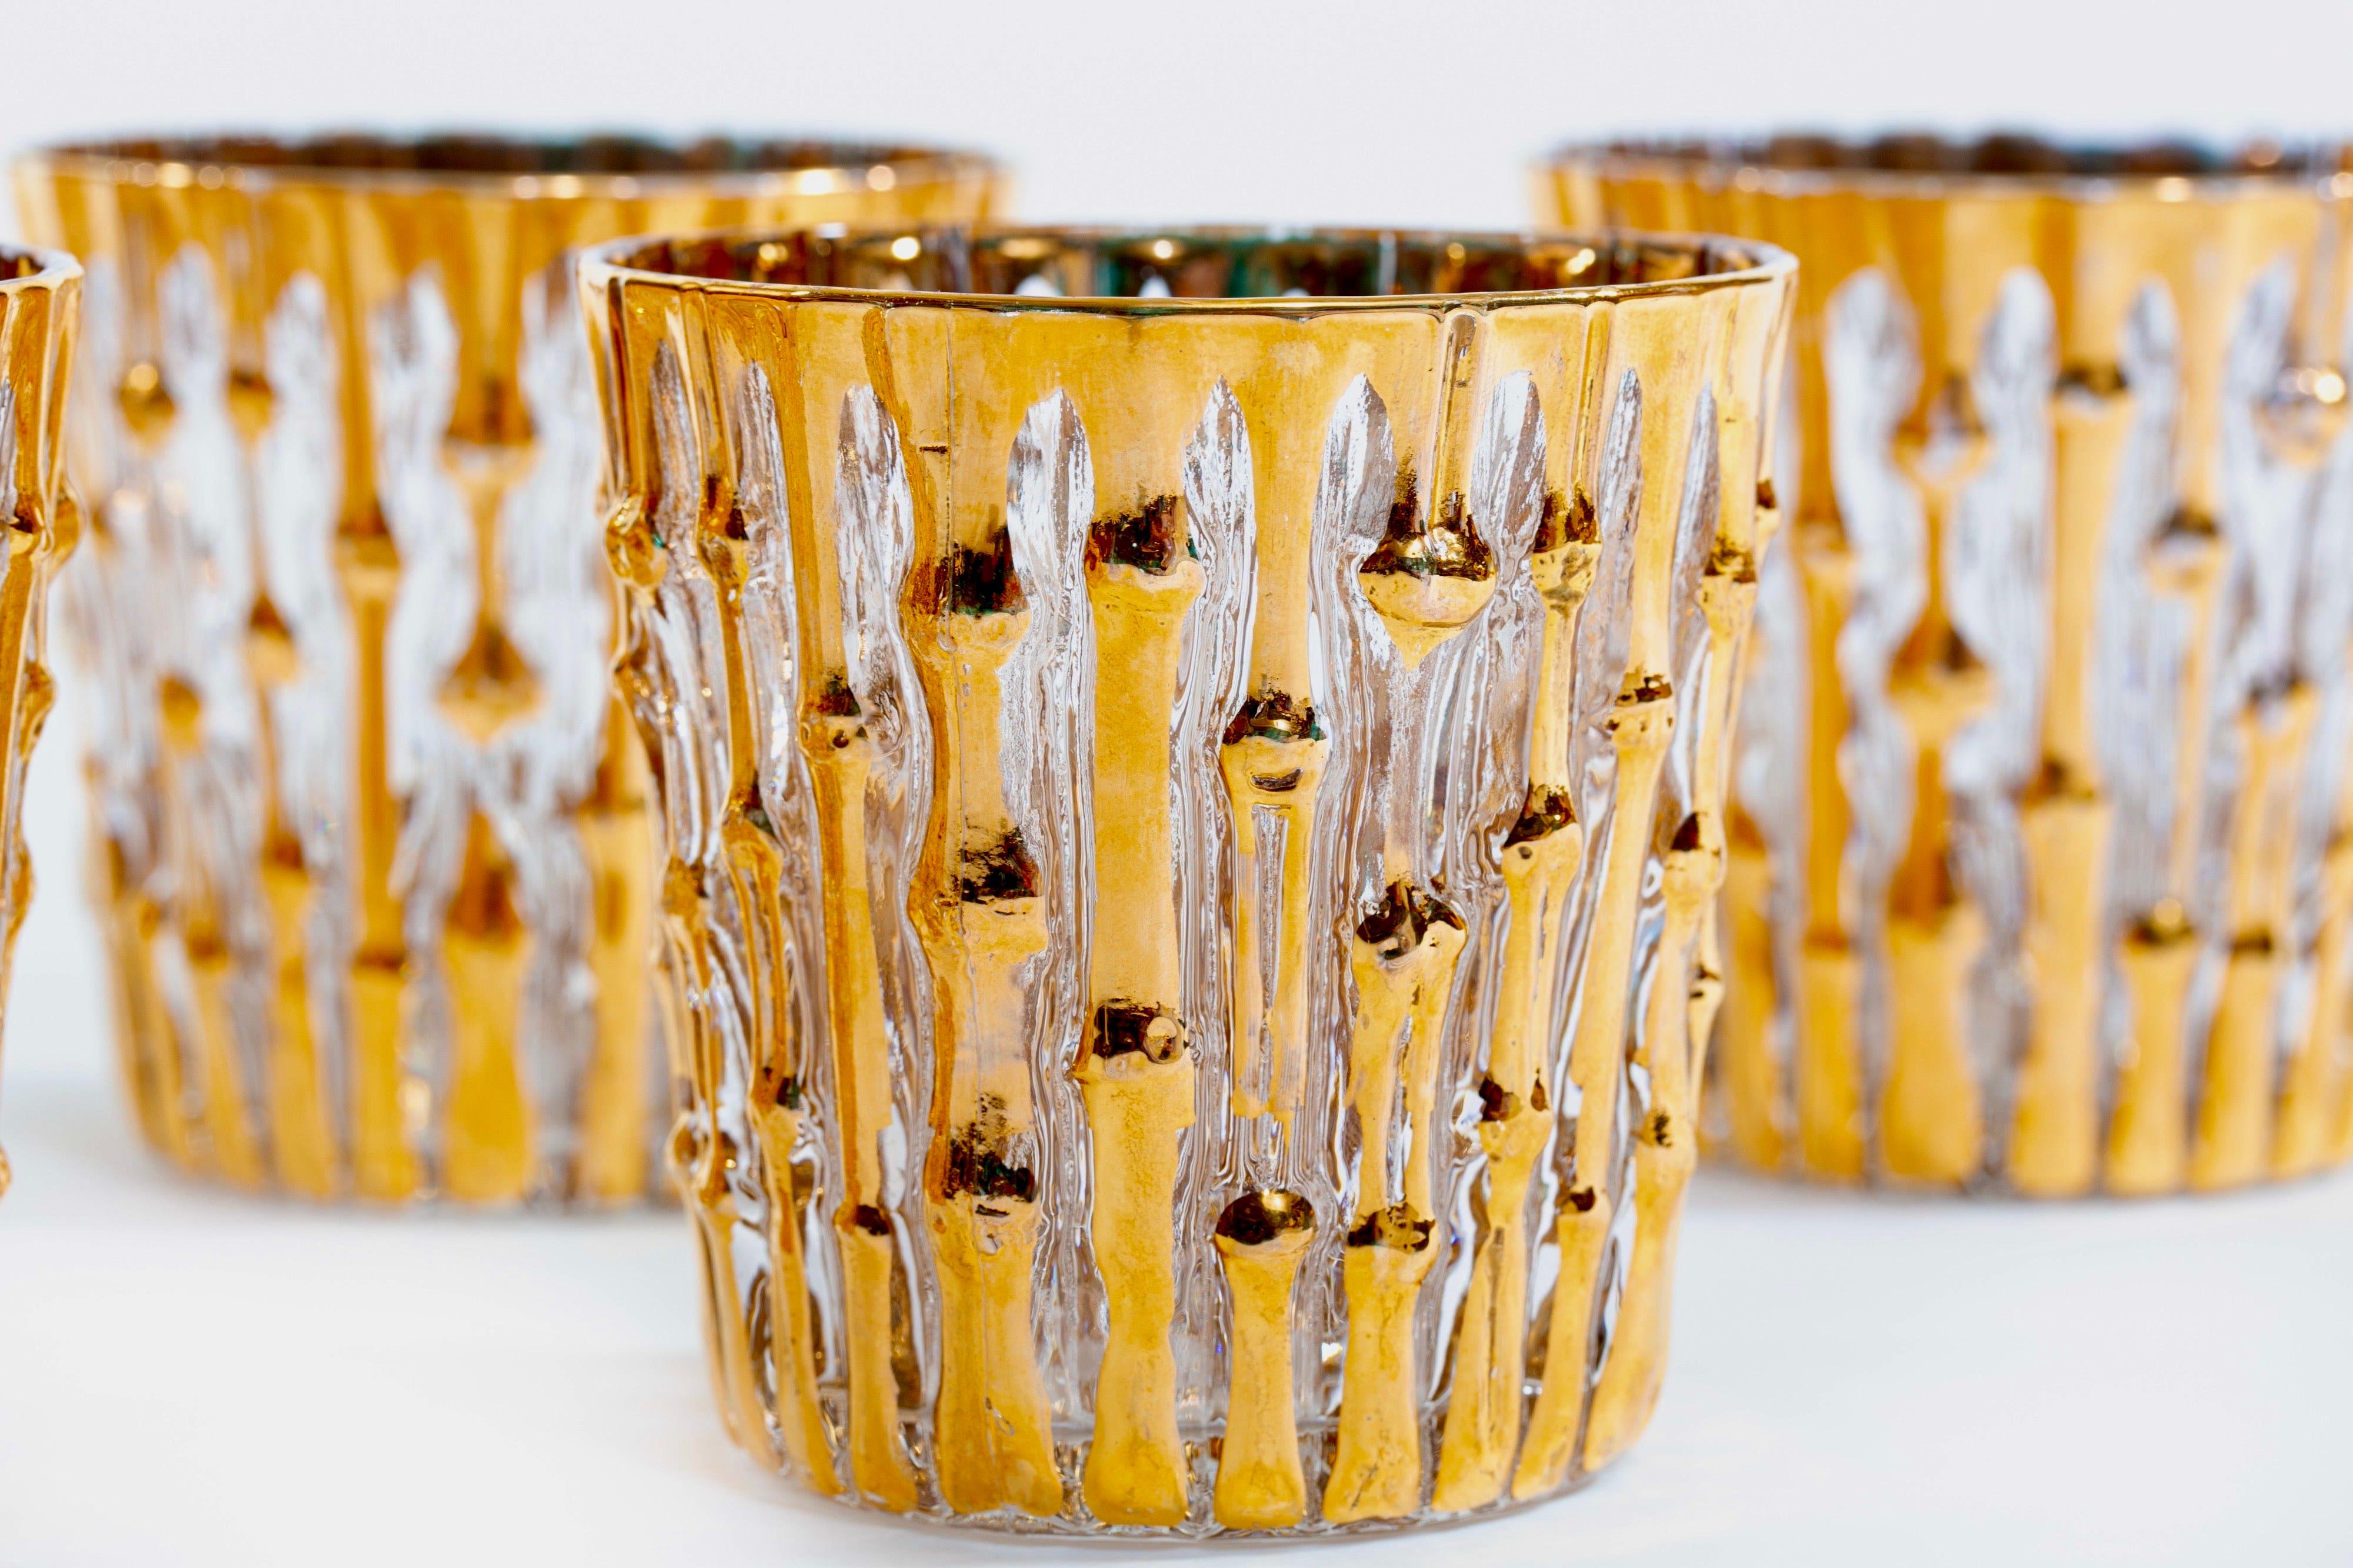 Grab them while they last! And they won't. Rare, and in excellent condition with no gold loss on rims - set of 22-karat gold hand painted bamboo pattern rocks glasses by the Imperial Glass Company. The bamboo pattern is embossed, meaning the glasses